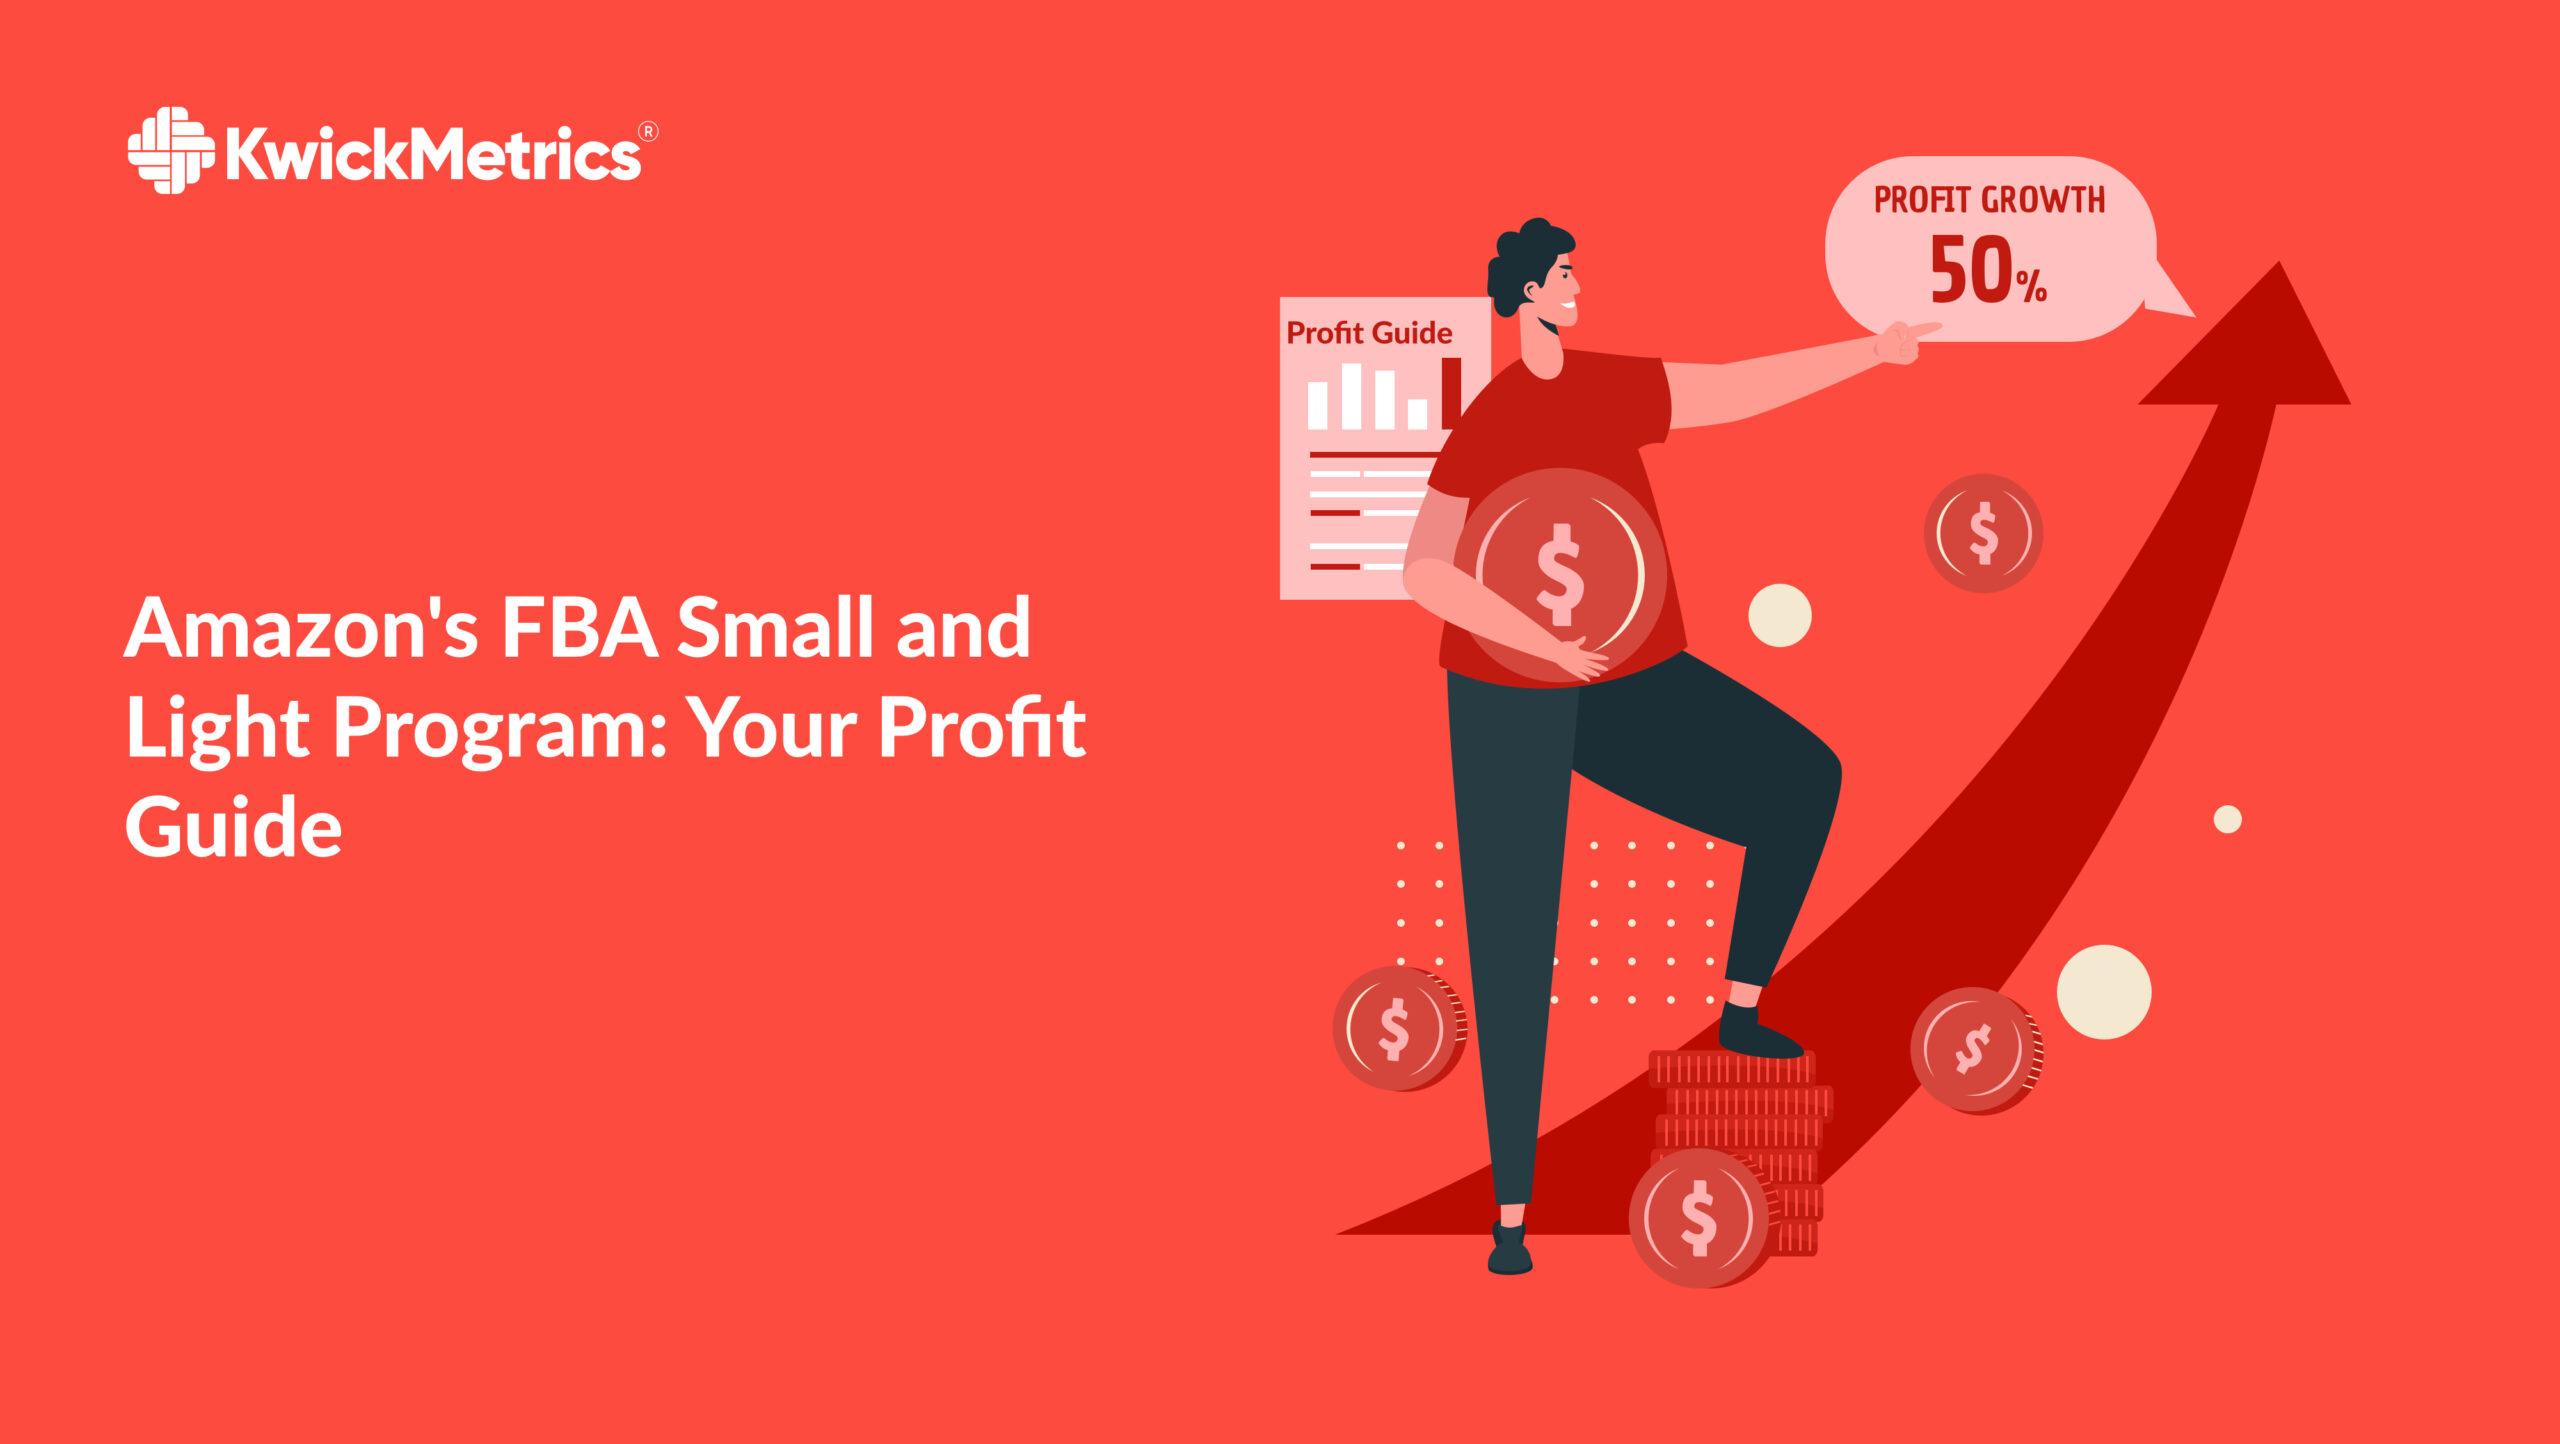 Amazon's FBA Small and Light Program: Your Profit Guide